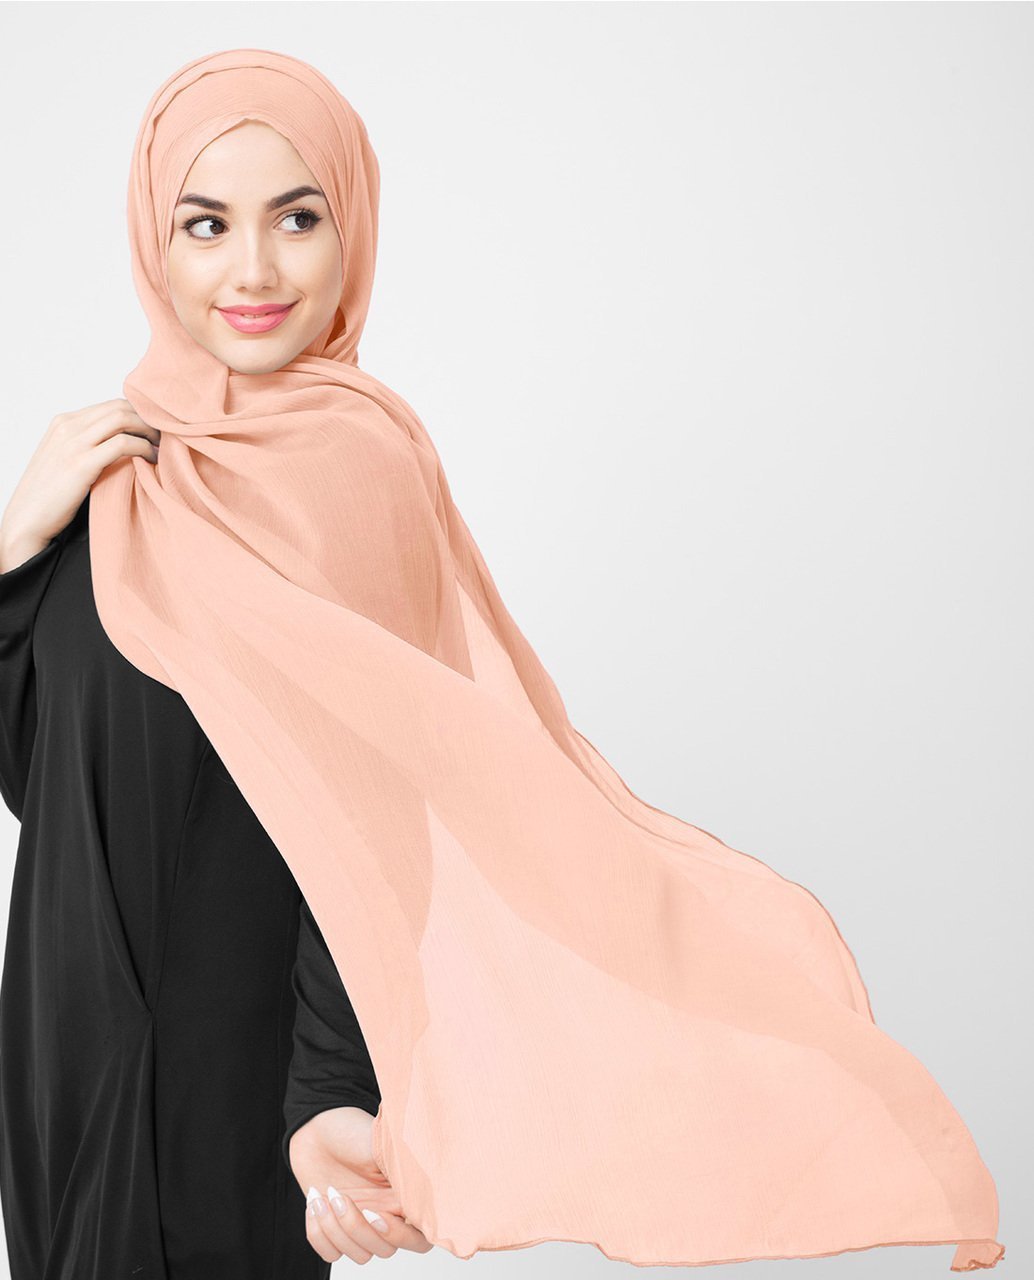 Chiffon Hijab in Evening Sand Color M Evening Sand 